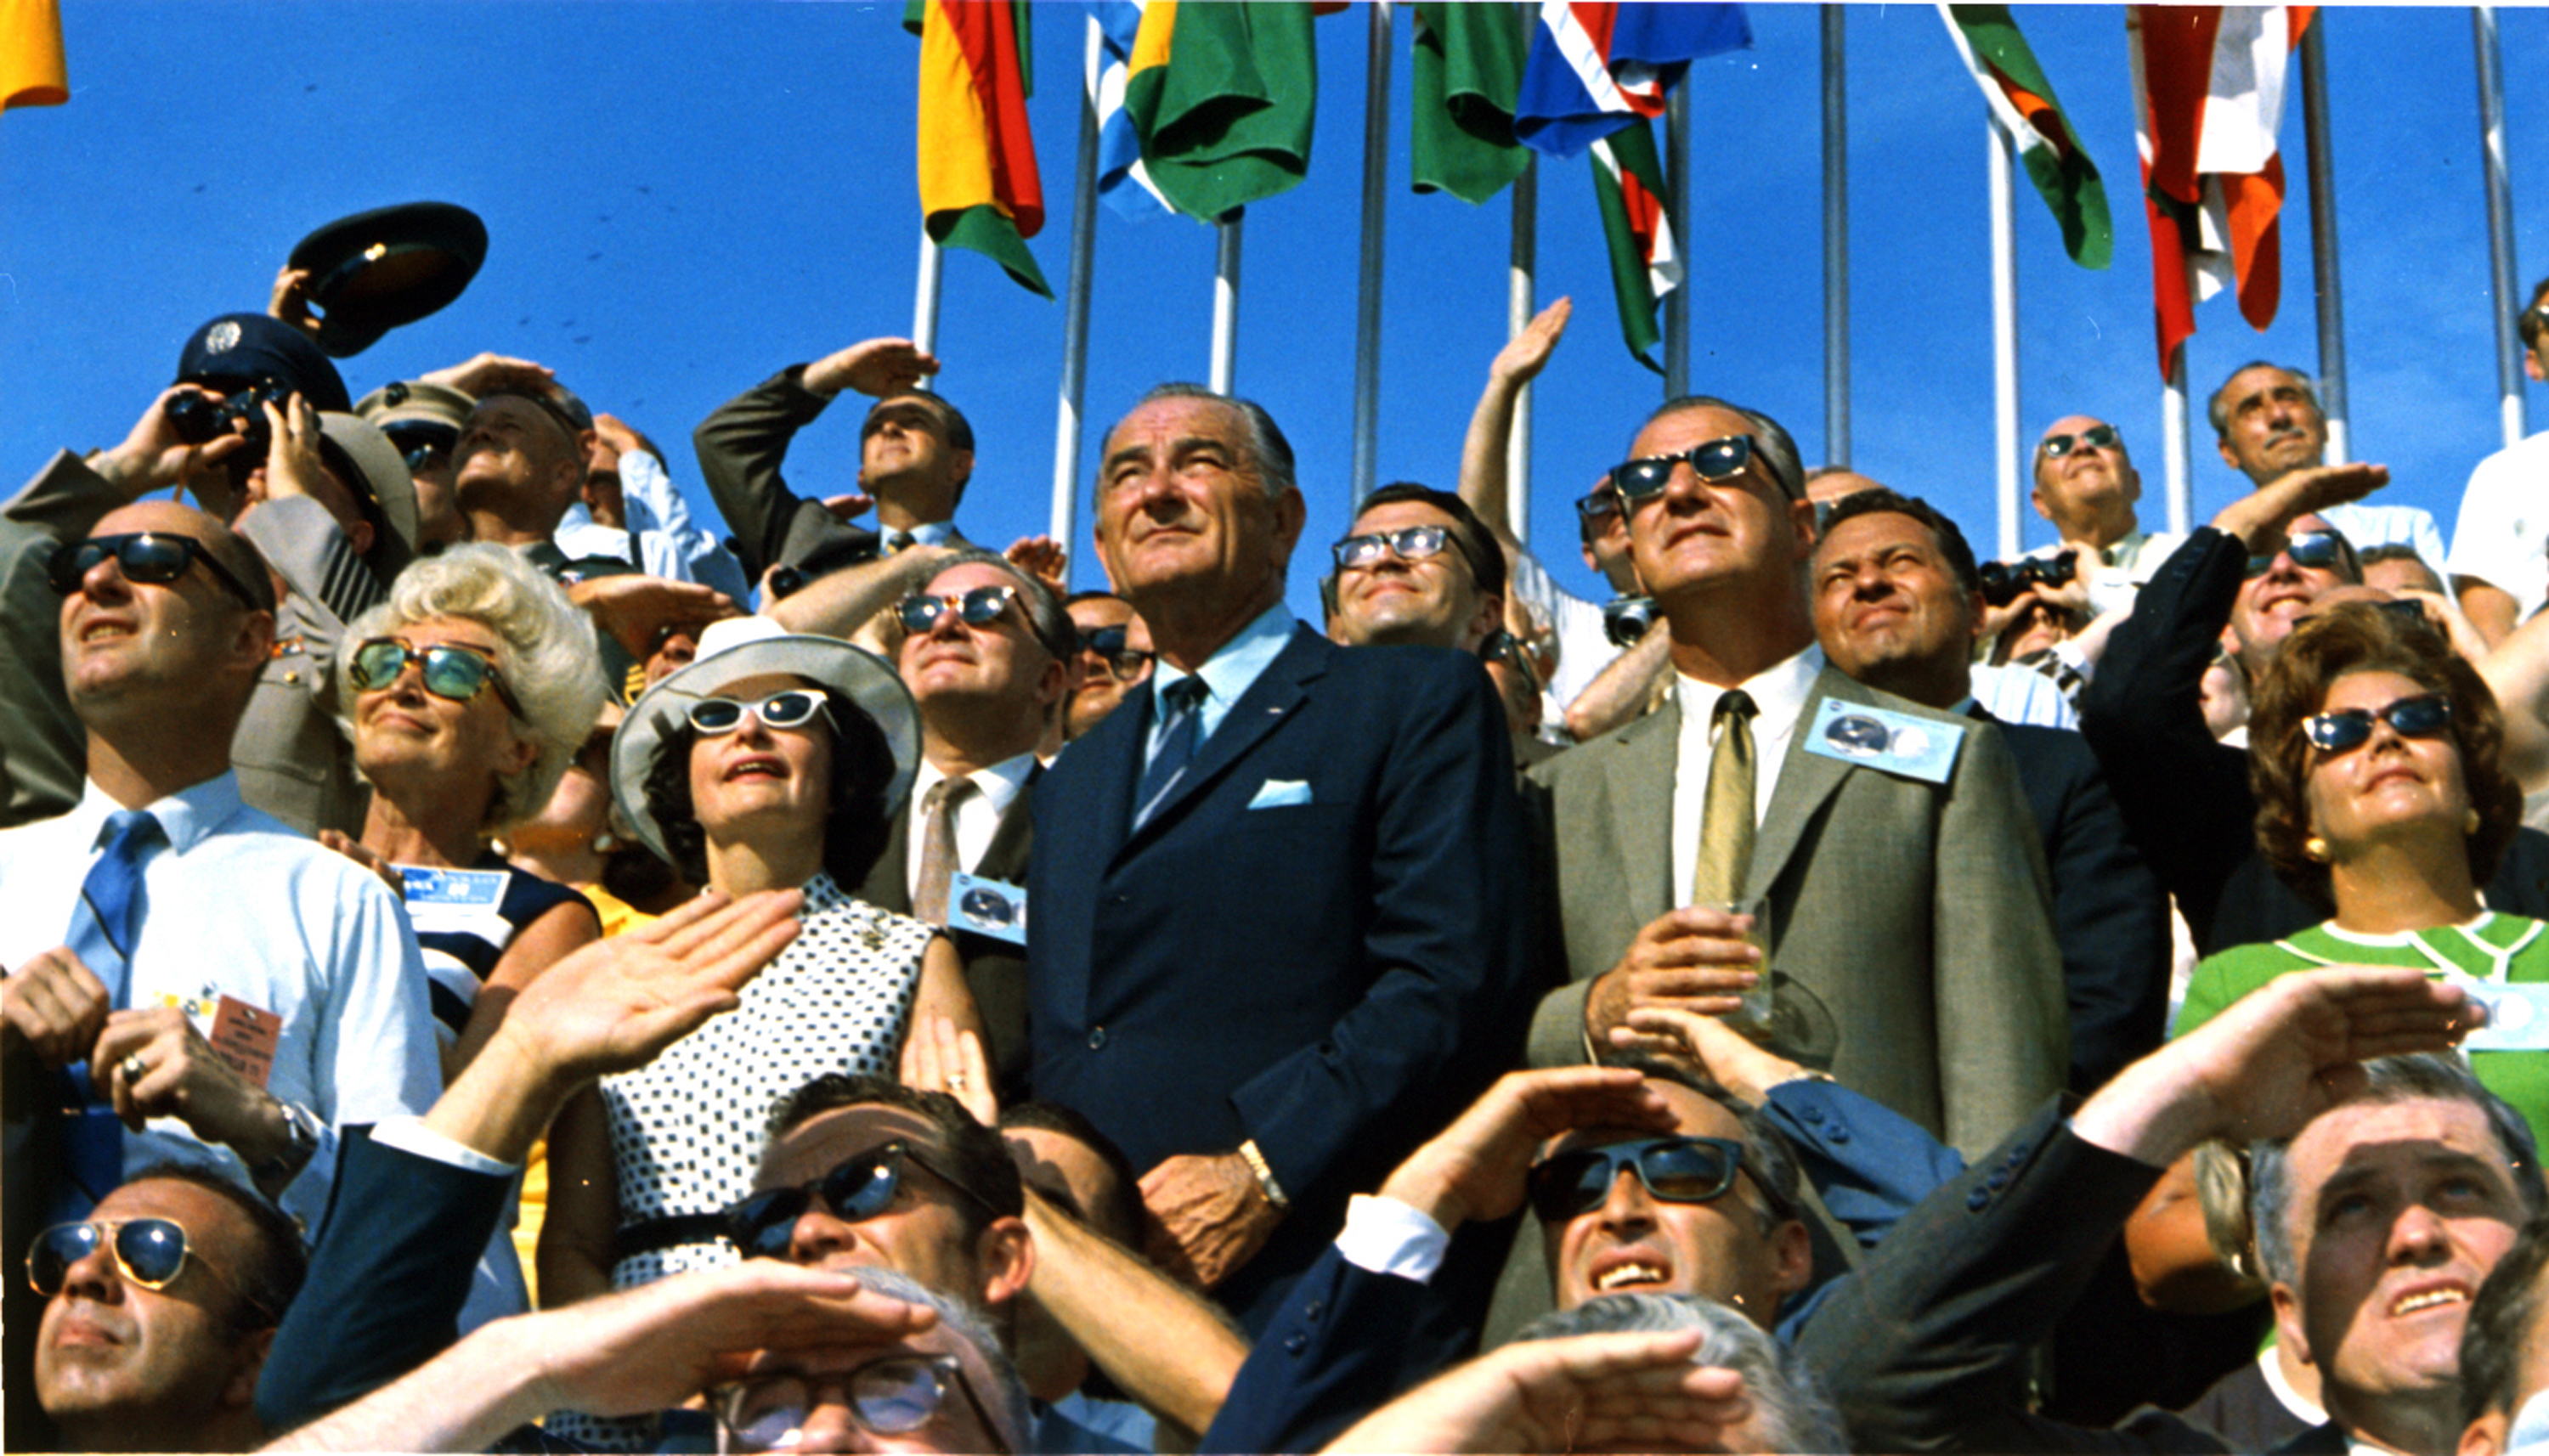 Former U.S. President Lyndon B. Johnson and then-current Vice President Spiro Agnew are among the spectators at the launch of Apollo 11 at Kennedy Space Center on July 16, 1969.